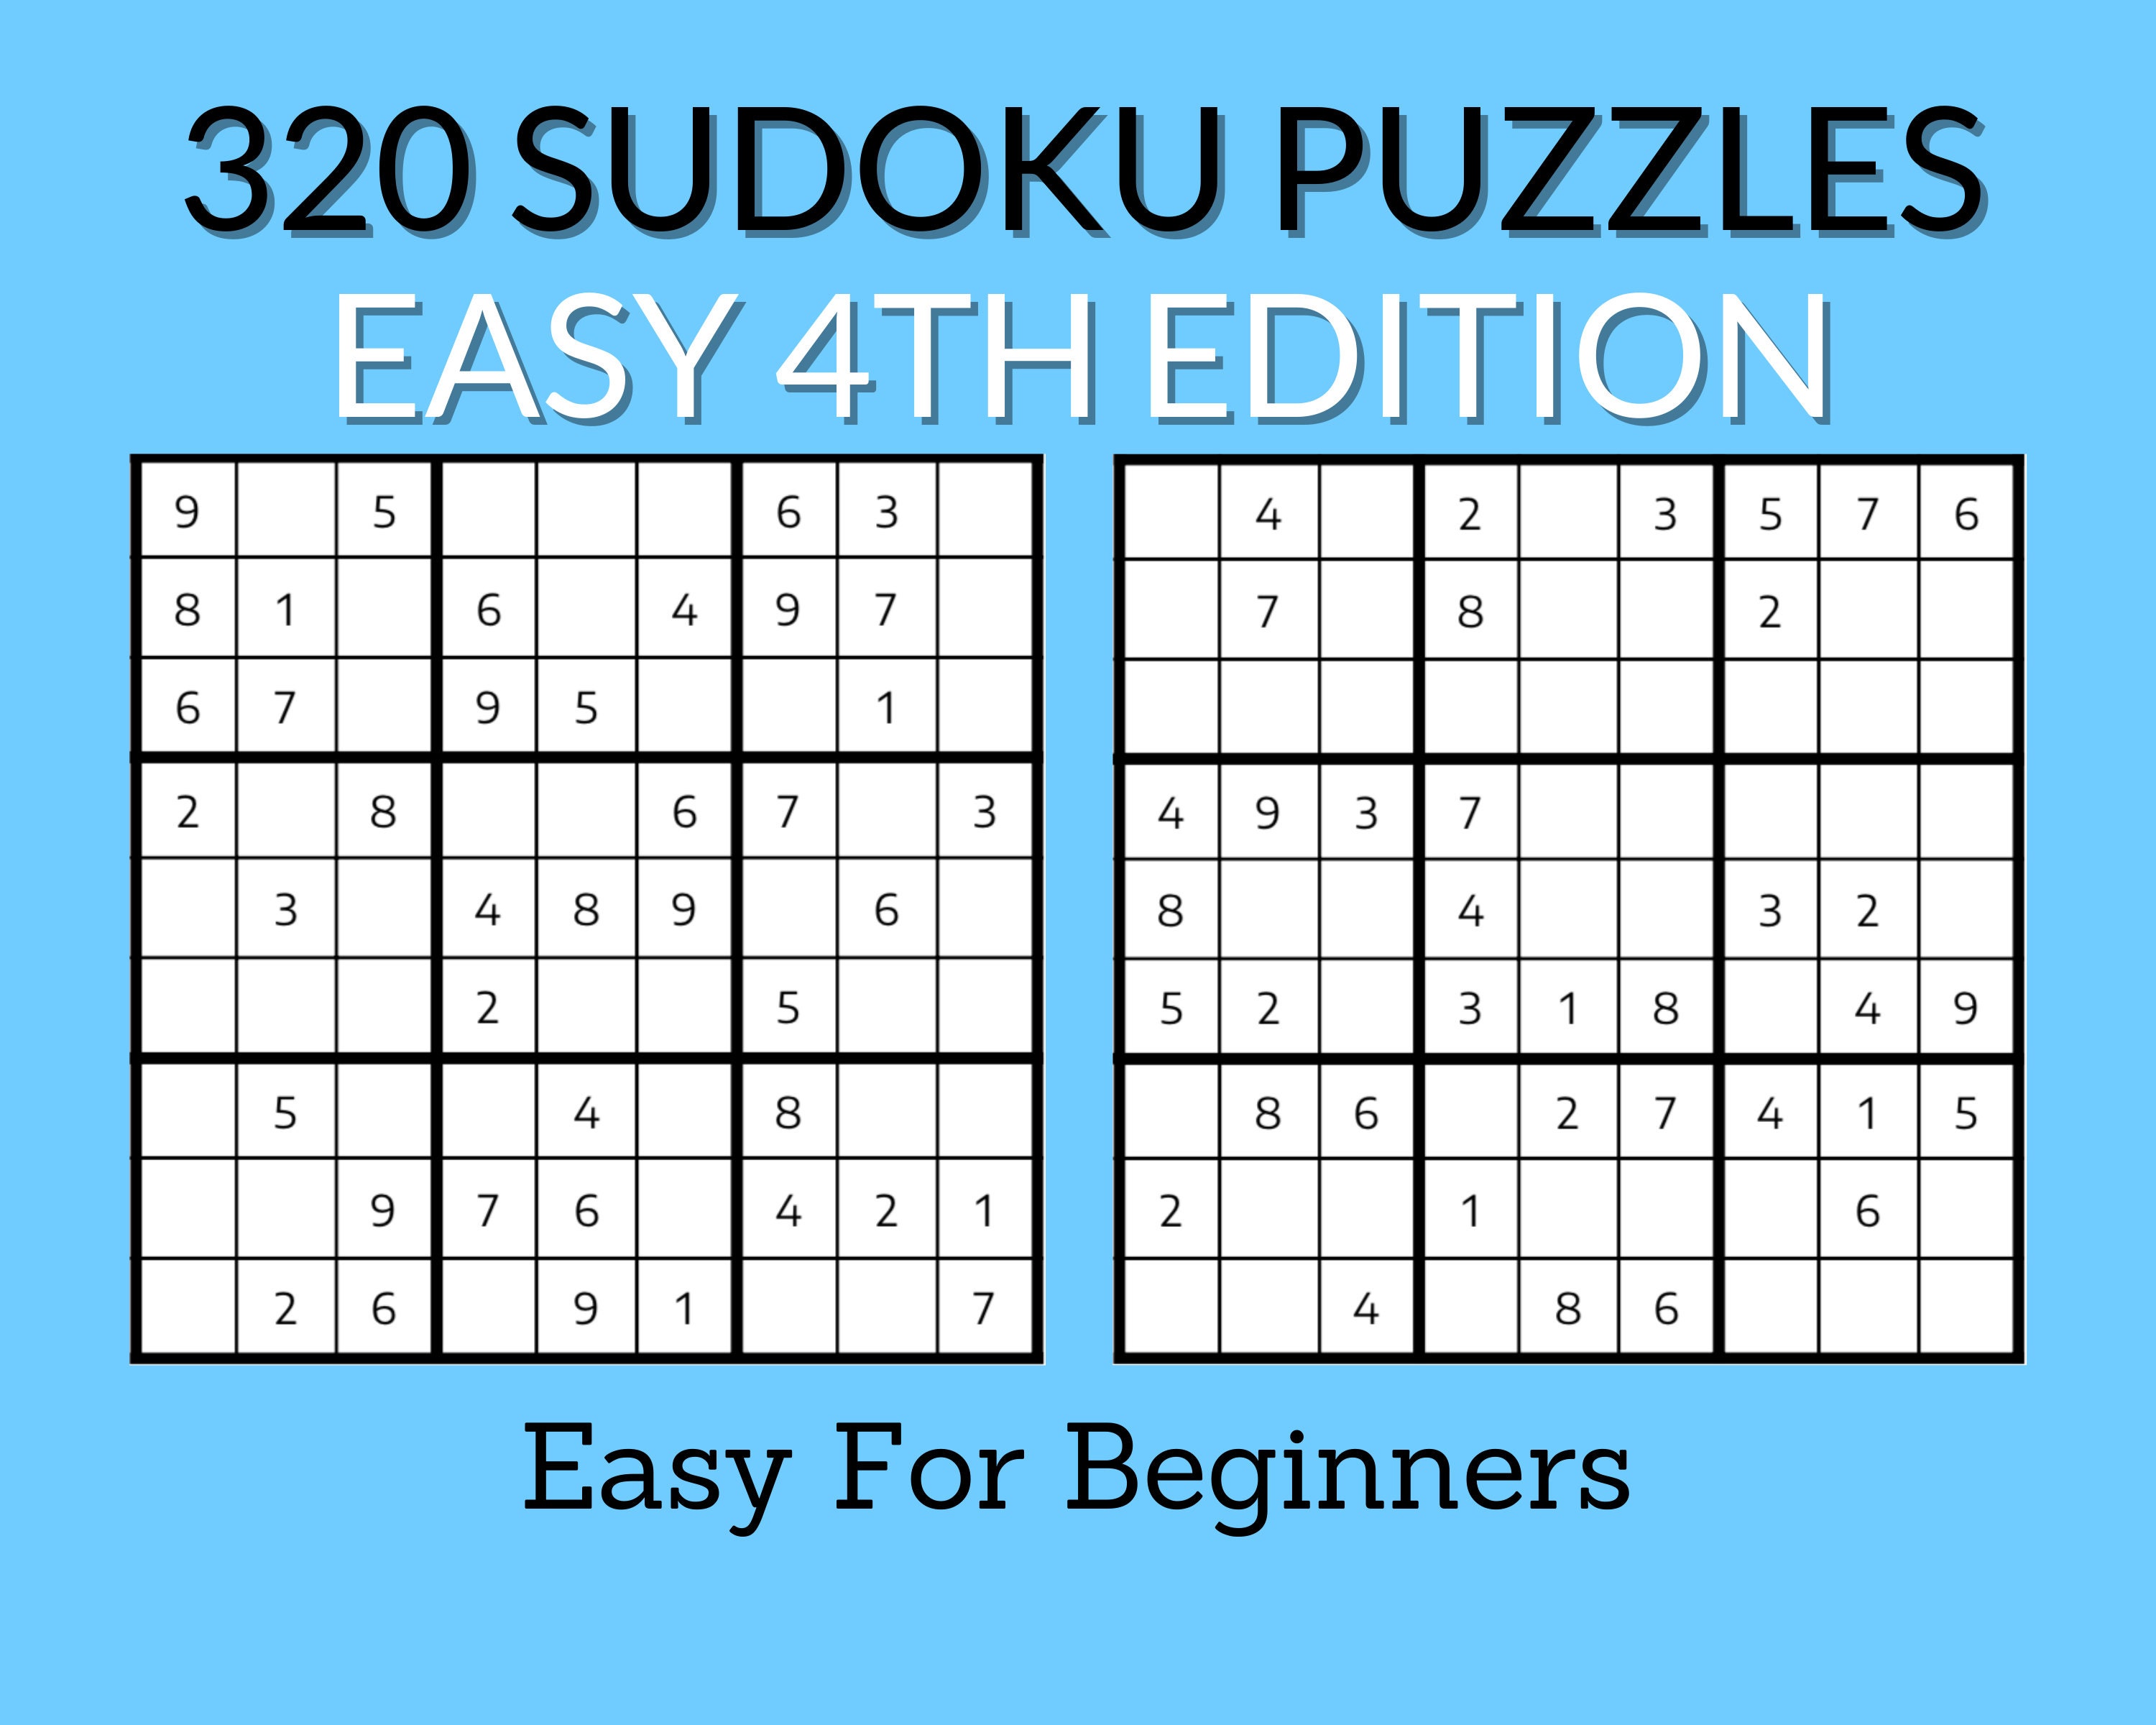 Easy Sudoku Puzzle Books For Kids: 180 Easy Sudoku Puzzles For Kids And  Beginners - Ages 9-11 - 4x4, 6x6 and 9x9, With Solutions (Paperback)